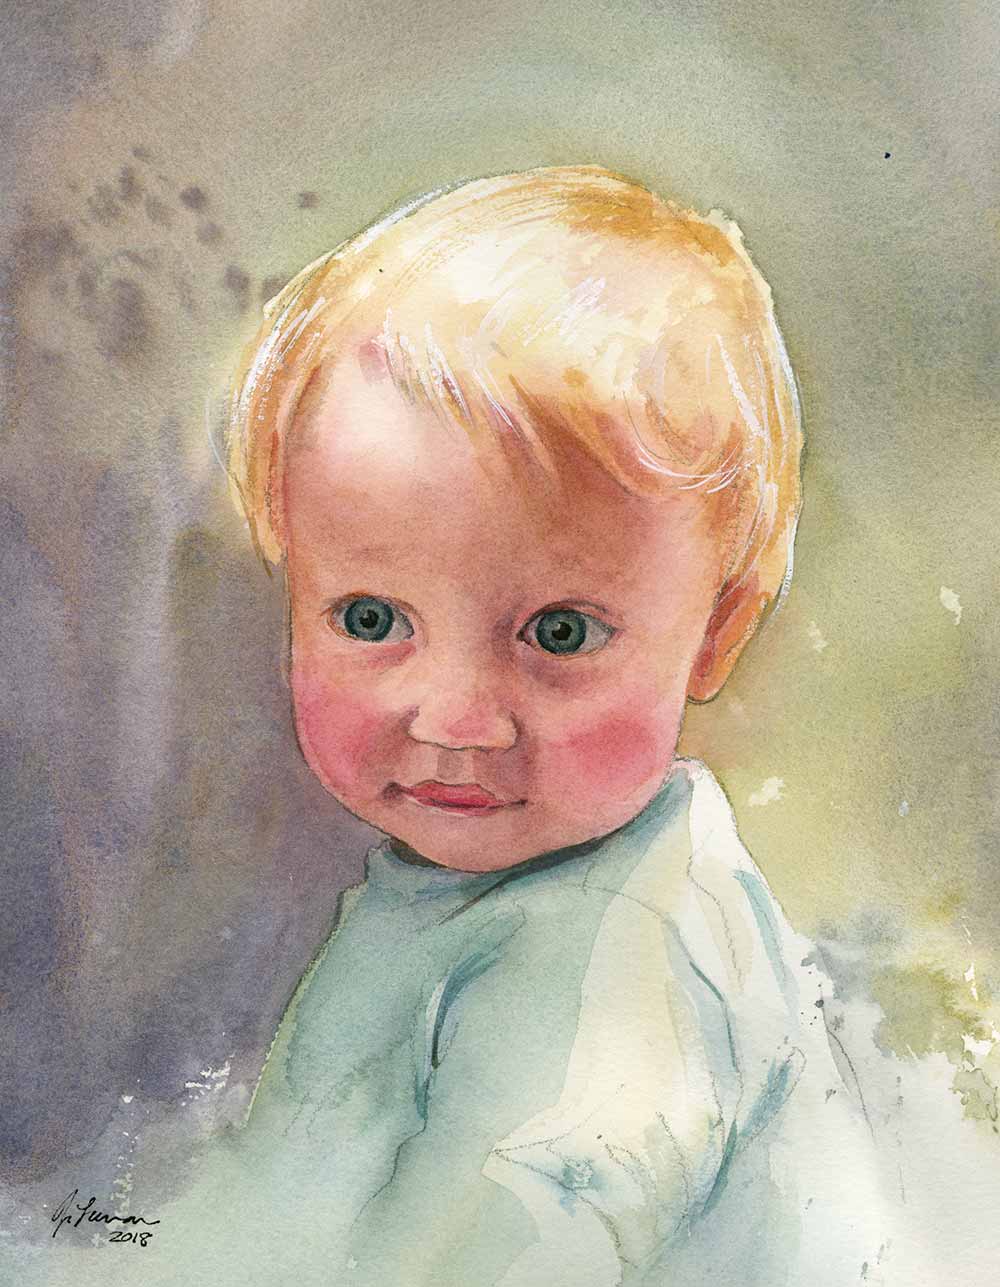 Watercolor portrait of a light-skinned baby with blond hair wearing a blue shirt